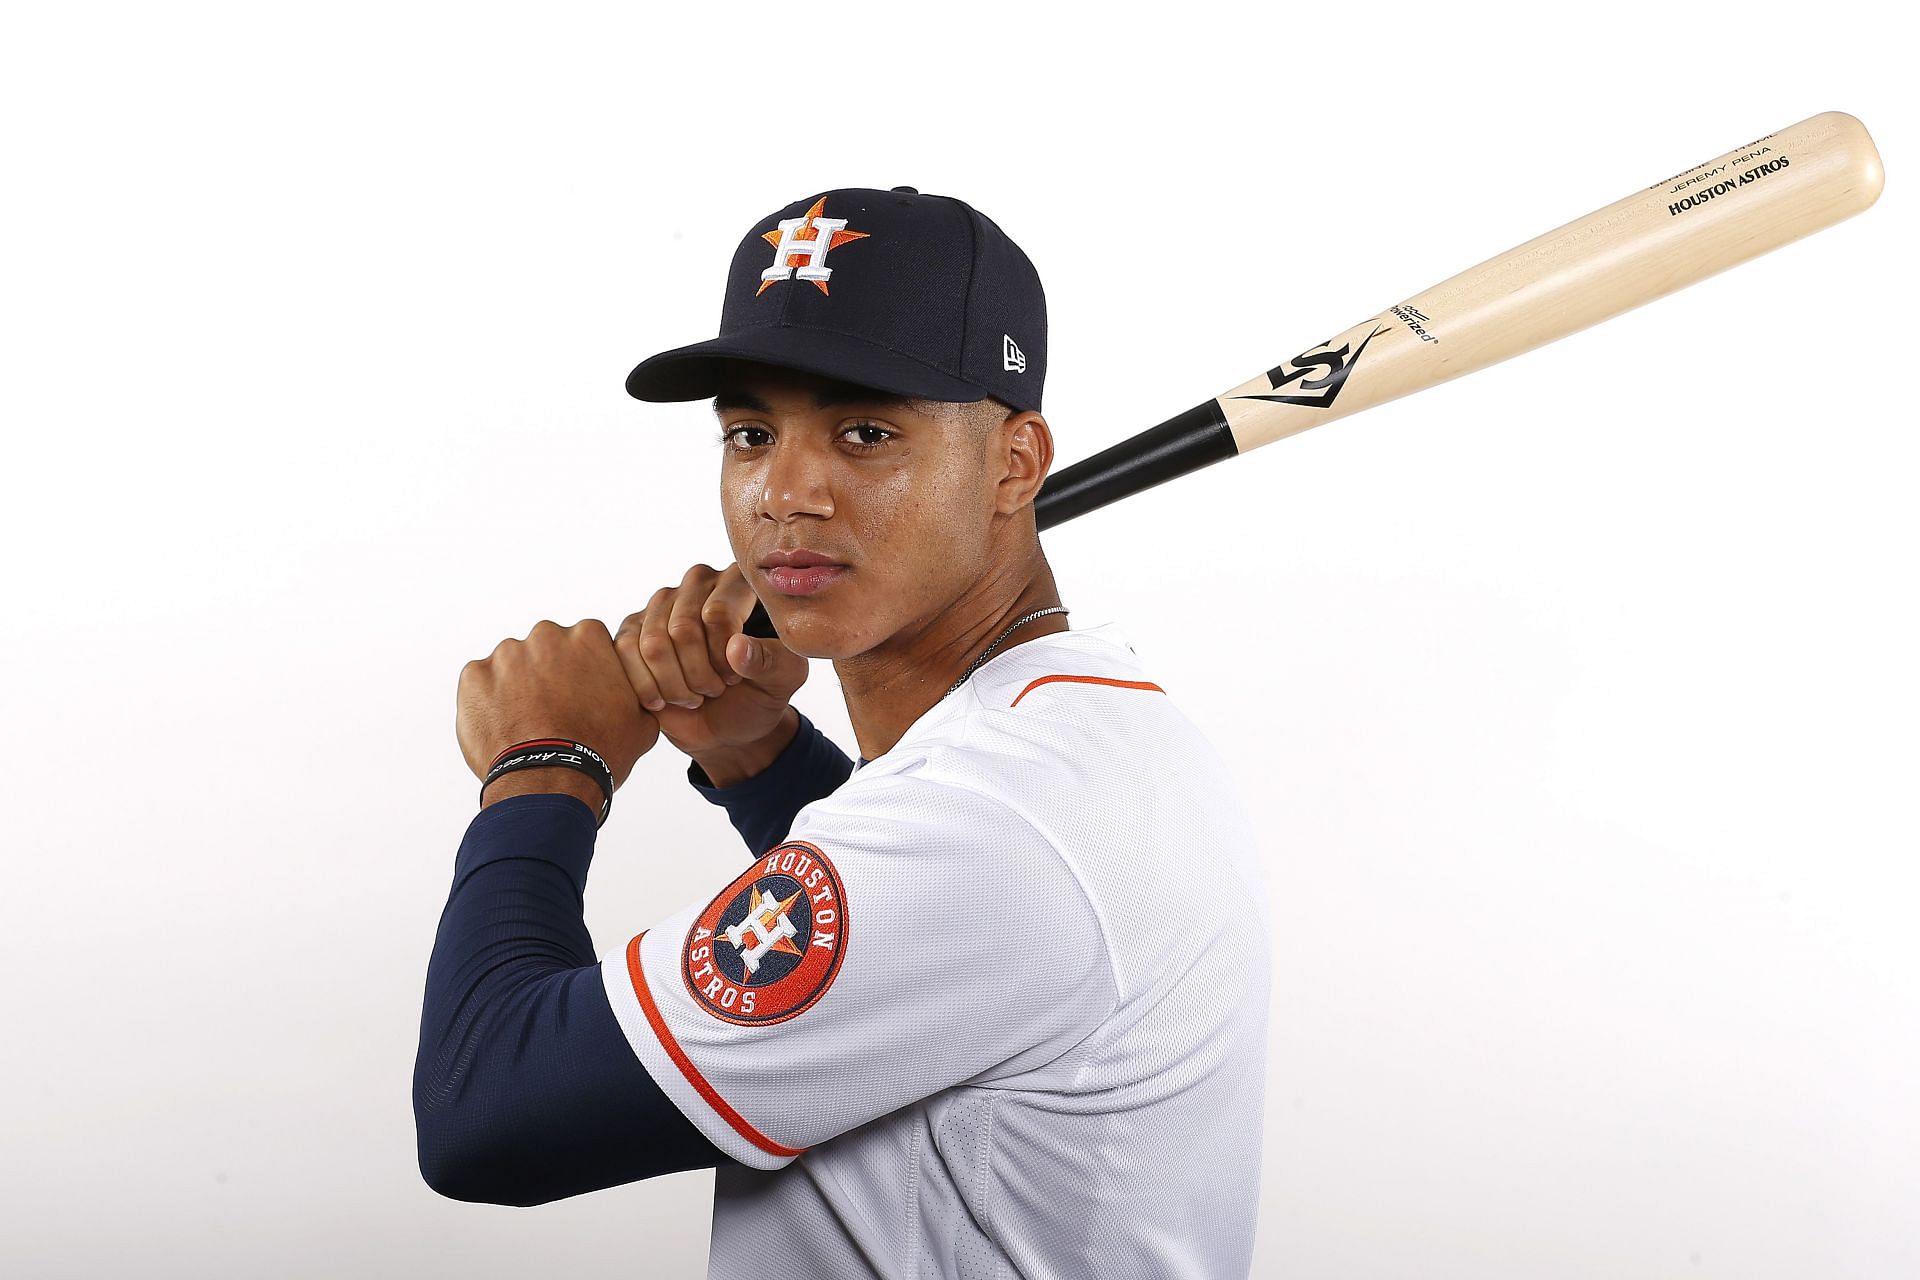 Jeremy Pena: Houston Astros rookie sensation Jeremy Pena continues to revel  in the success of clinching the 2022 World Series title